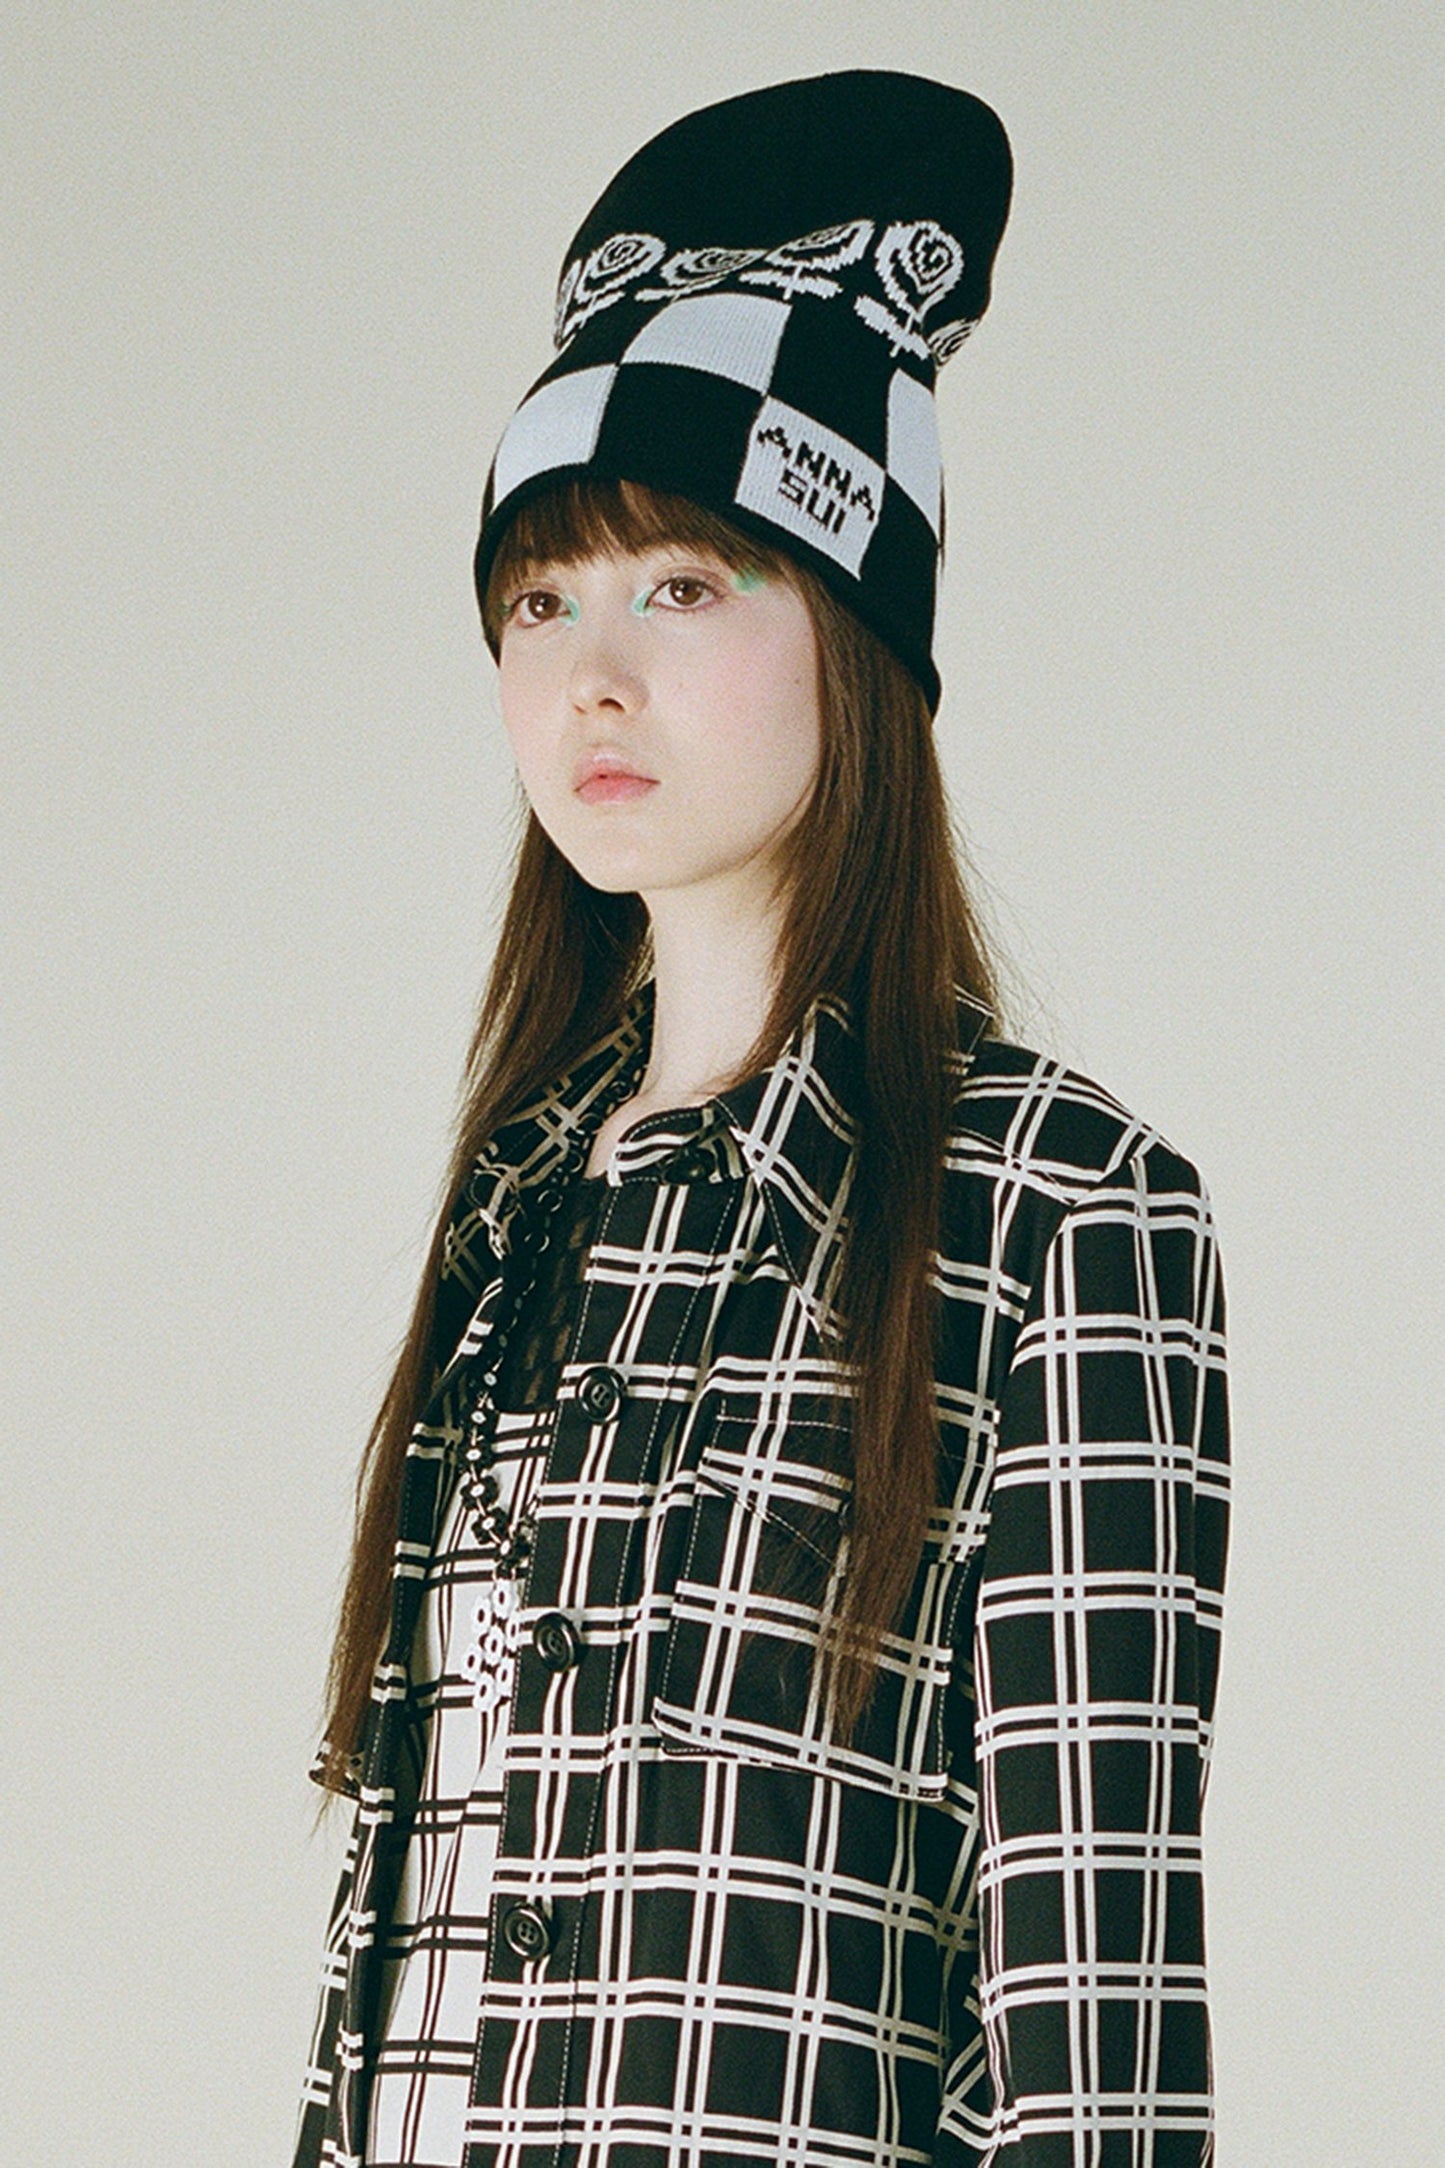 Rose Checker Beanie, black and white, with roses on top, Anna Sui in black in white square